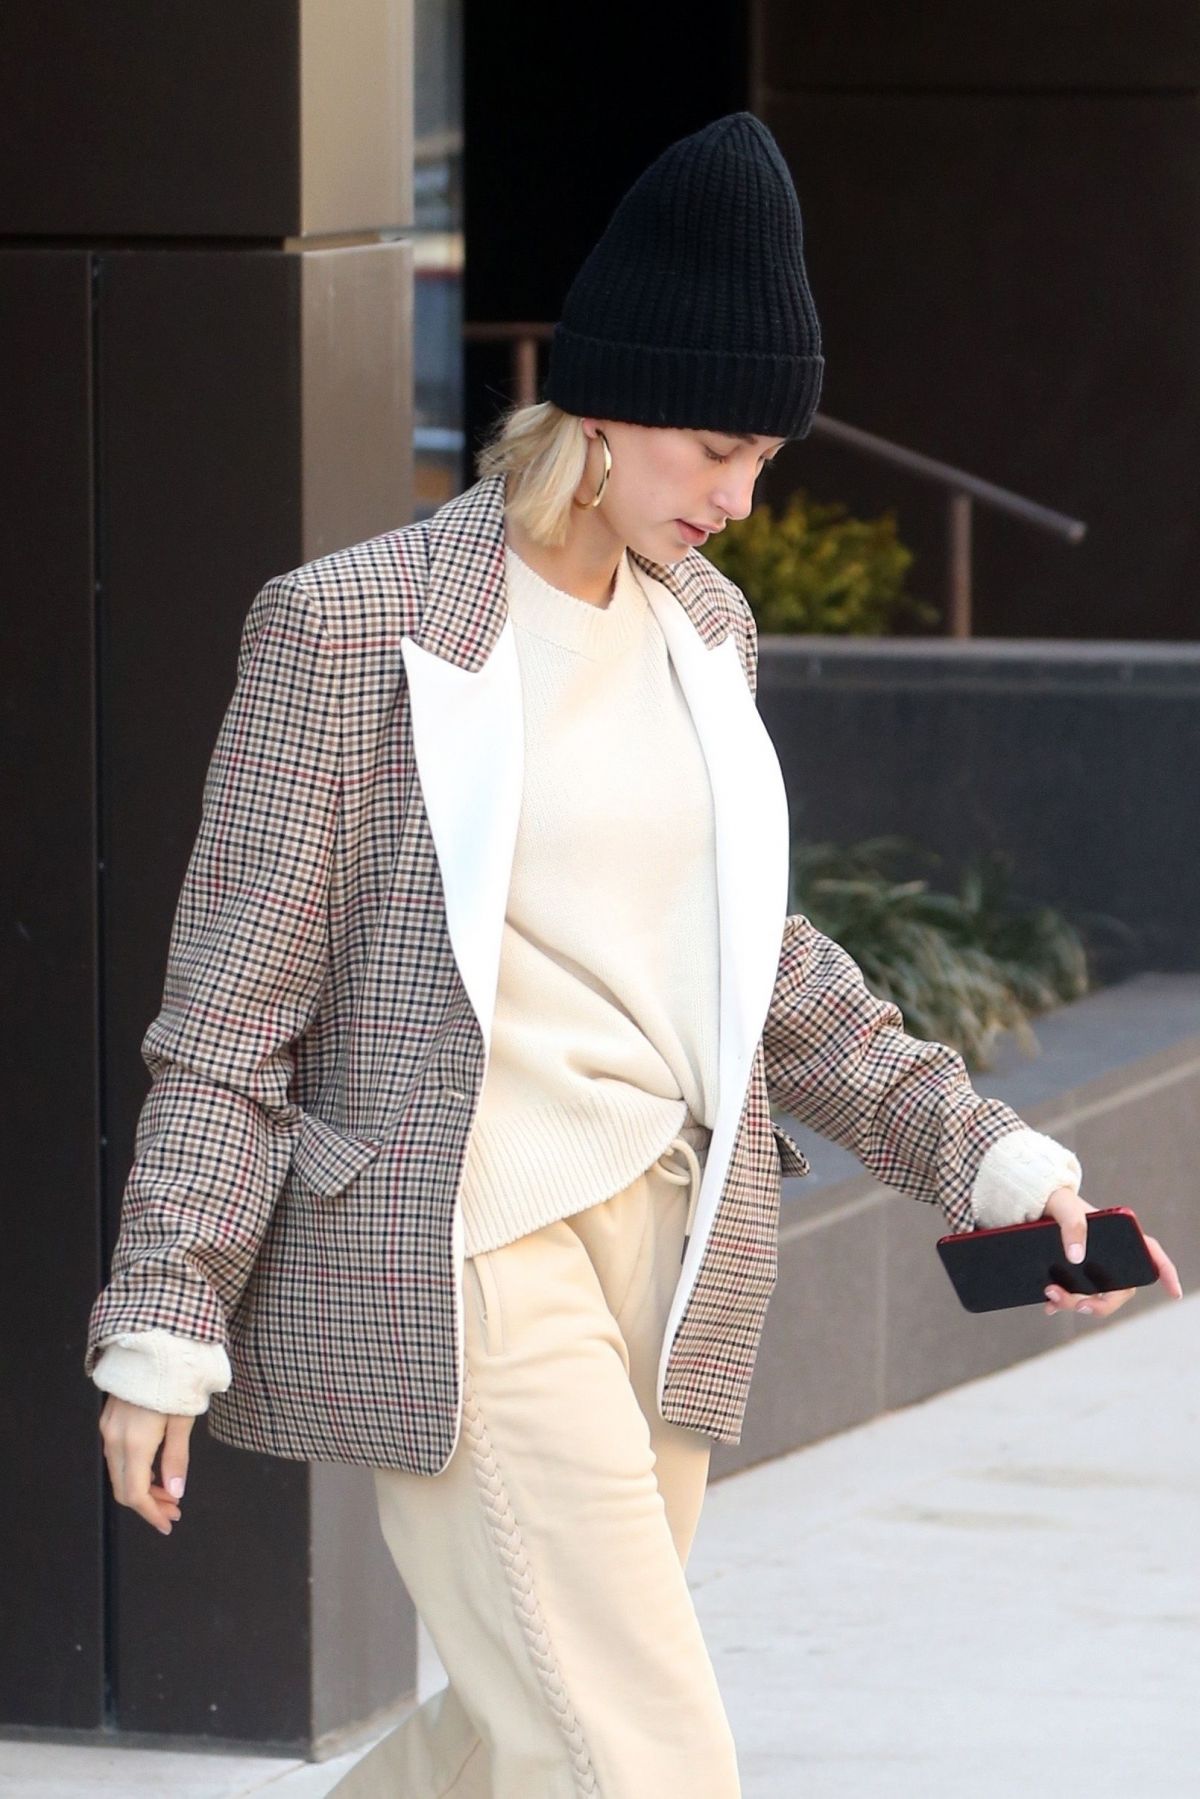 hailey-bieber-out-and-about-in-new-york-02-26-2019-7.jpg